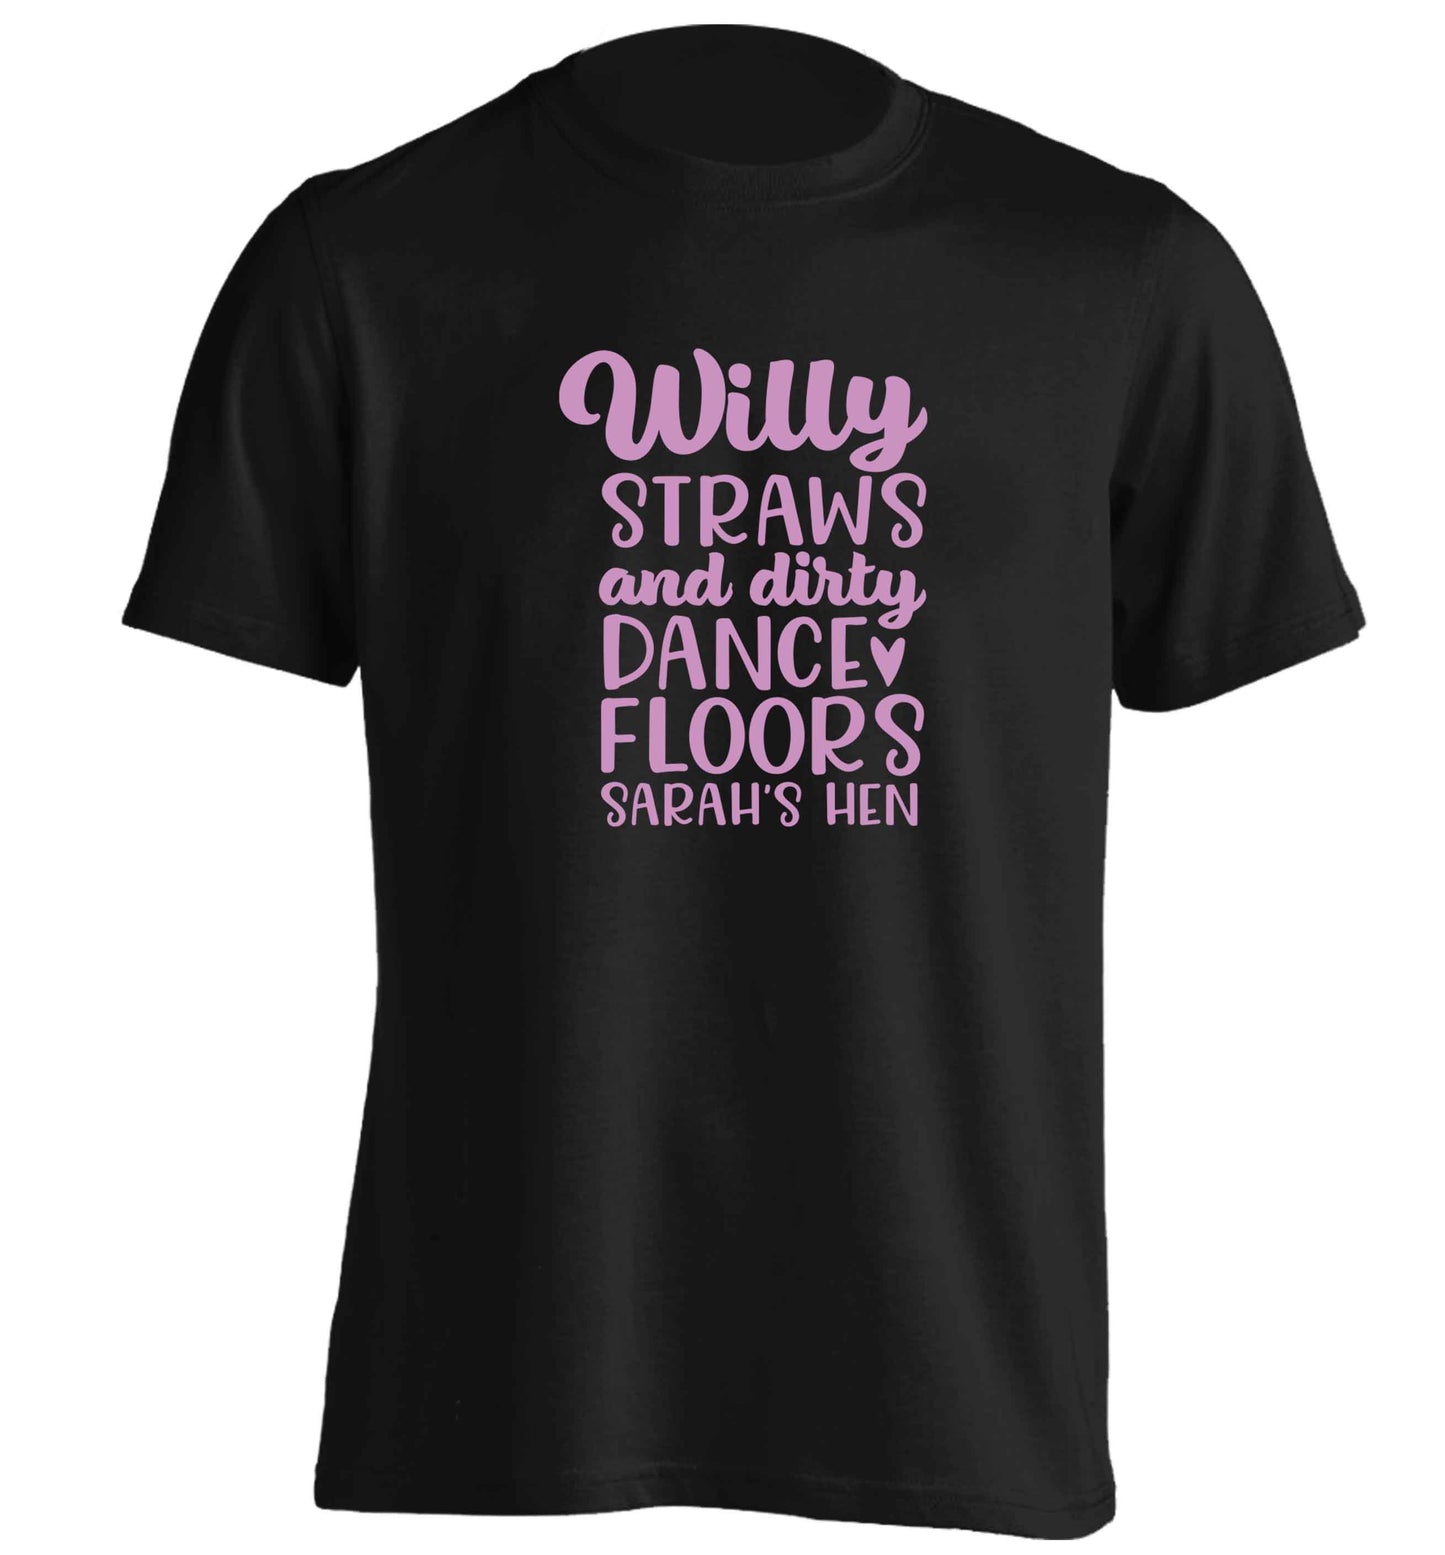 Willy straws and dirty dance floors adults unisex black Tshirt 2XL